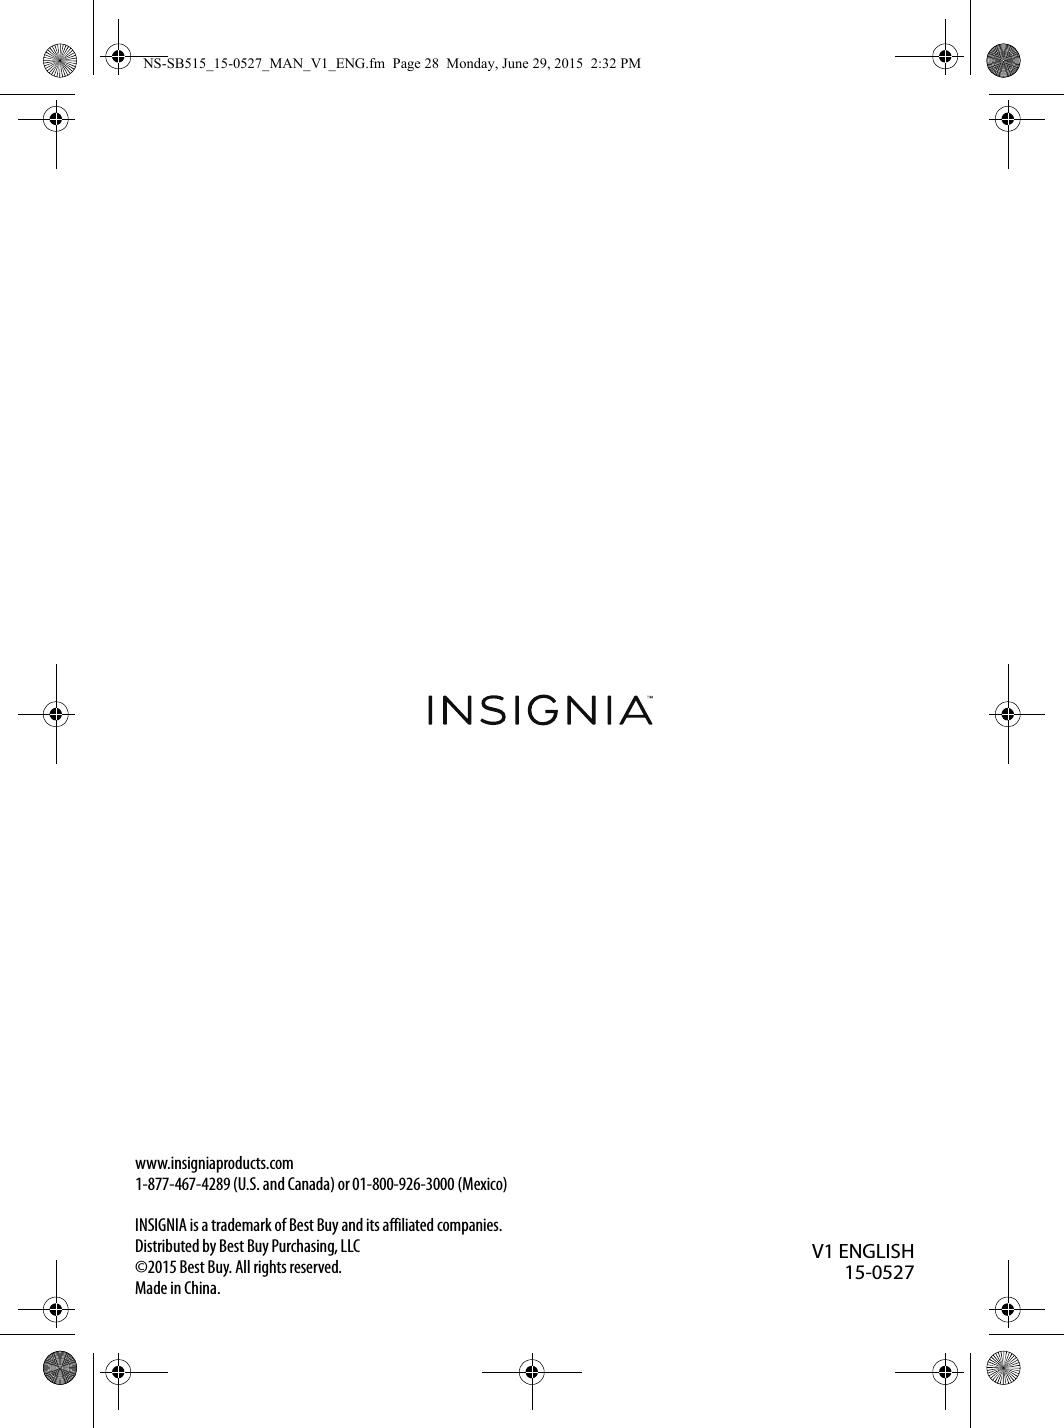 www.insigniaproducts.com1-877-467-4289 (U.S. and Canada) or 01-800-926-3000 (Mexico)INSIGNIA is a trademark of Best Buy and its affiliated companies.Distributed by Best Buy Purchasing, LLC©2015 Best Buy. All rights reserved.Made in China.V1 ENGLISH15-0527NS-SB515_15-0527_MAN_V1_ENG.fm  Page 28  Monday, June 29, 2015  2:32 PM